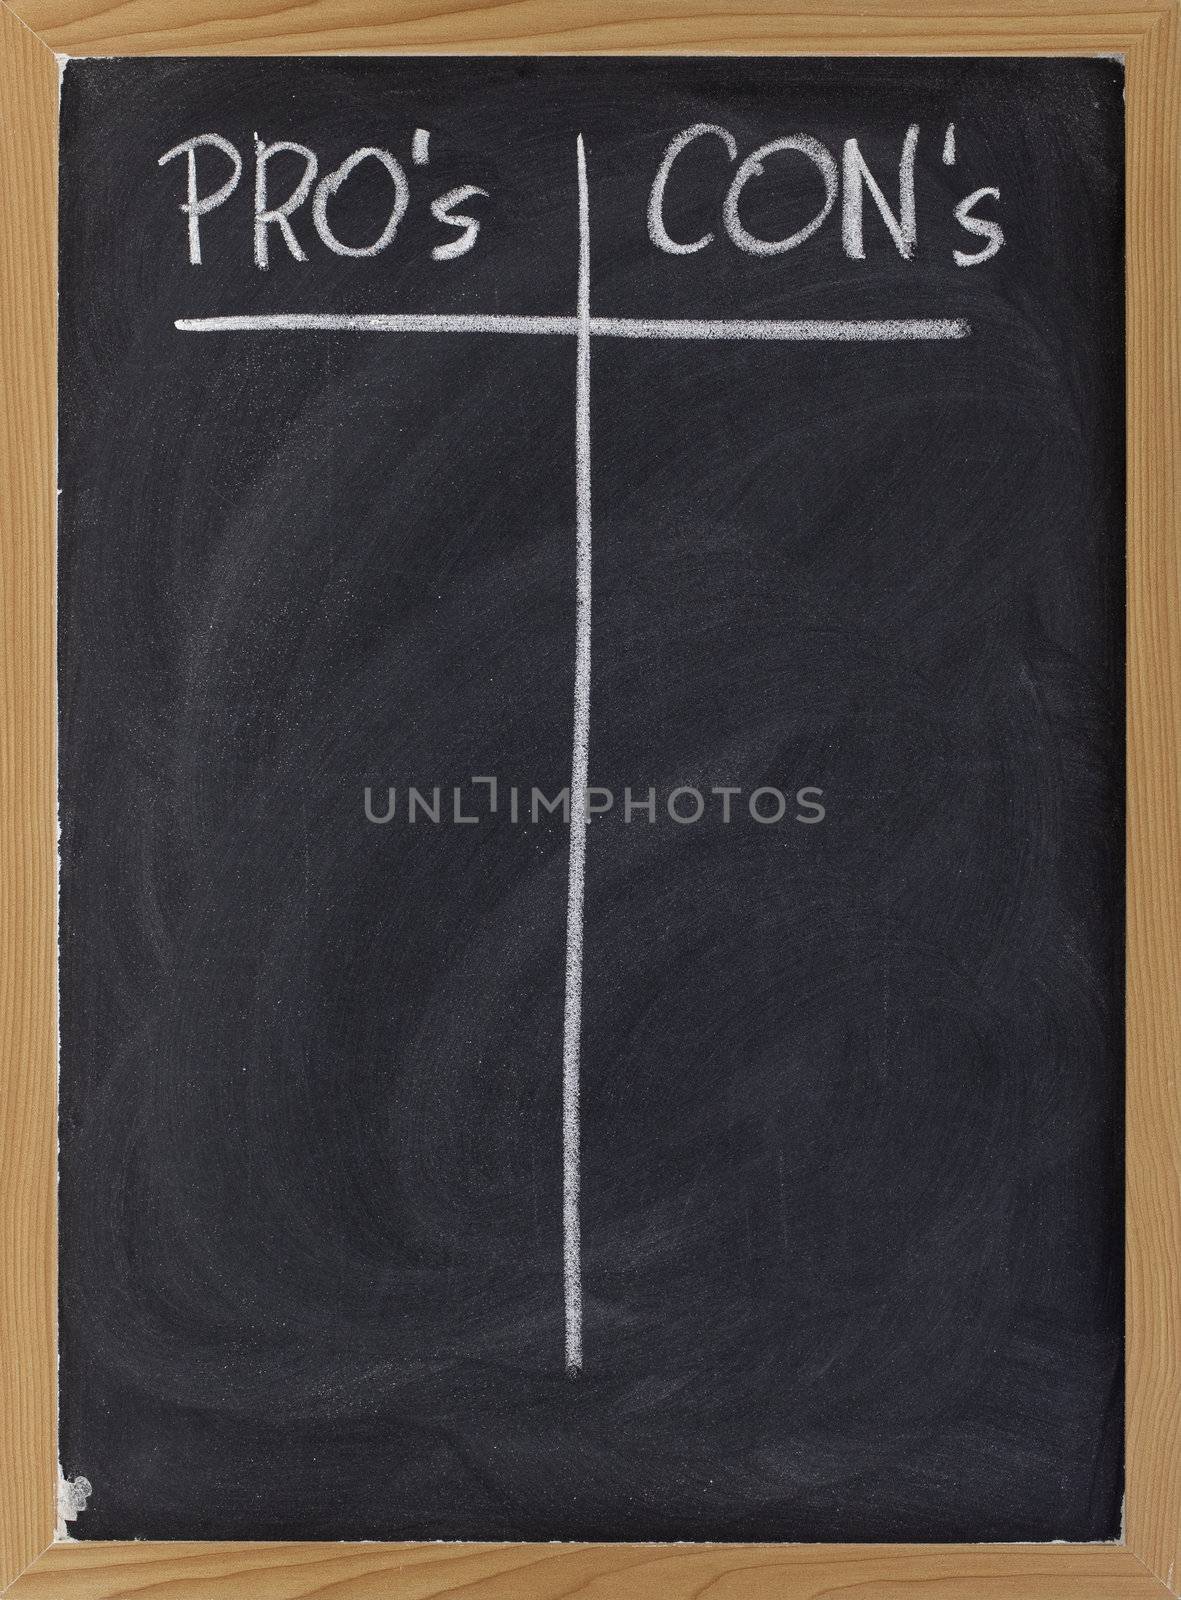 pros and cons, blank list of pro and con arguments - white chalk handwriting on a blackboard